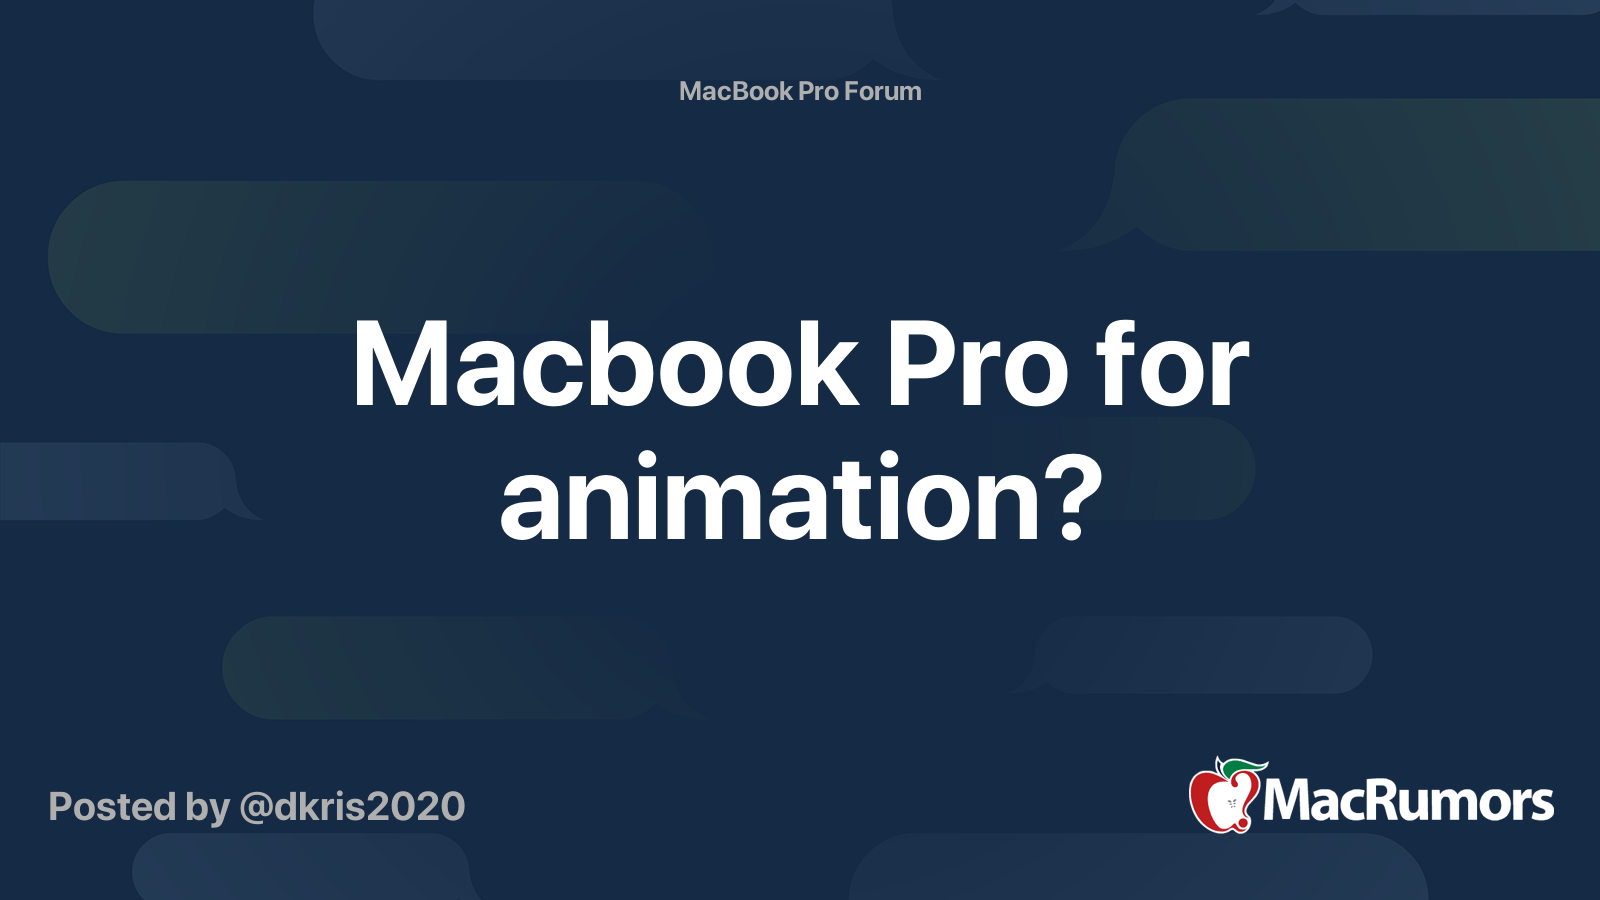 Macbook Pro for animation? | MacRumors Forums